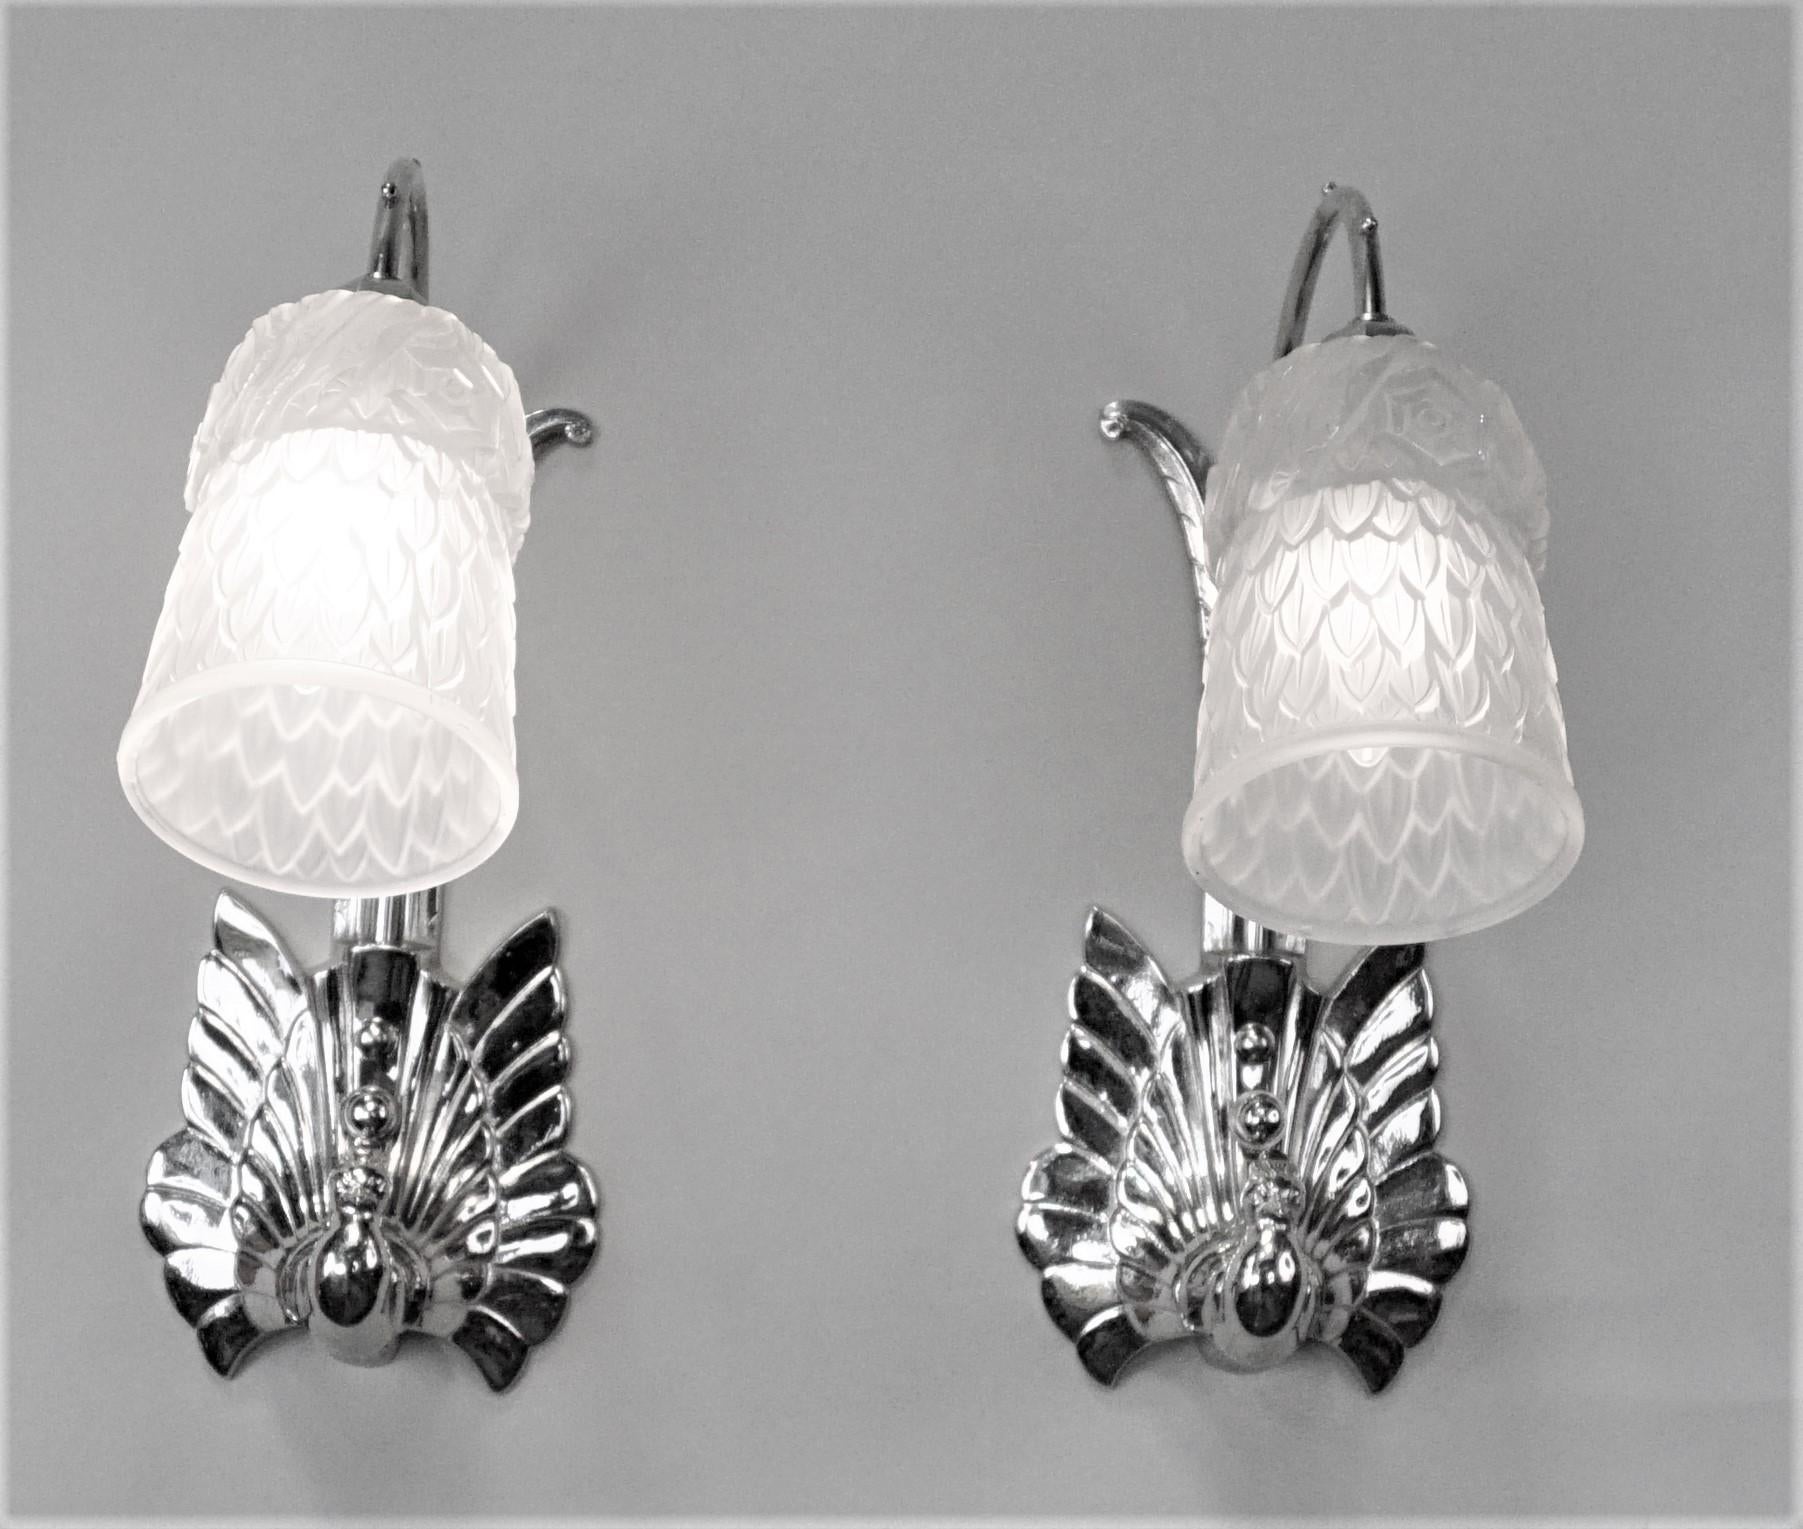 Plated Pair of Art Deco Wall Sconces by Charles Schneider